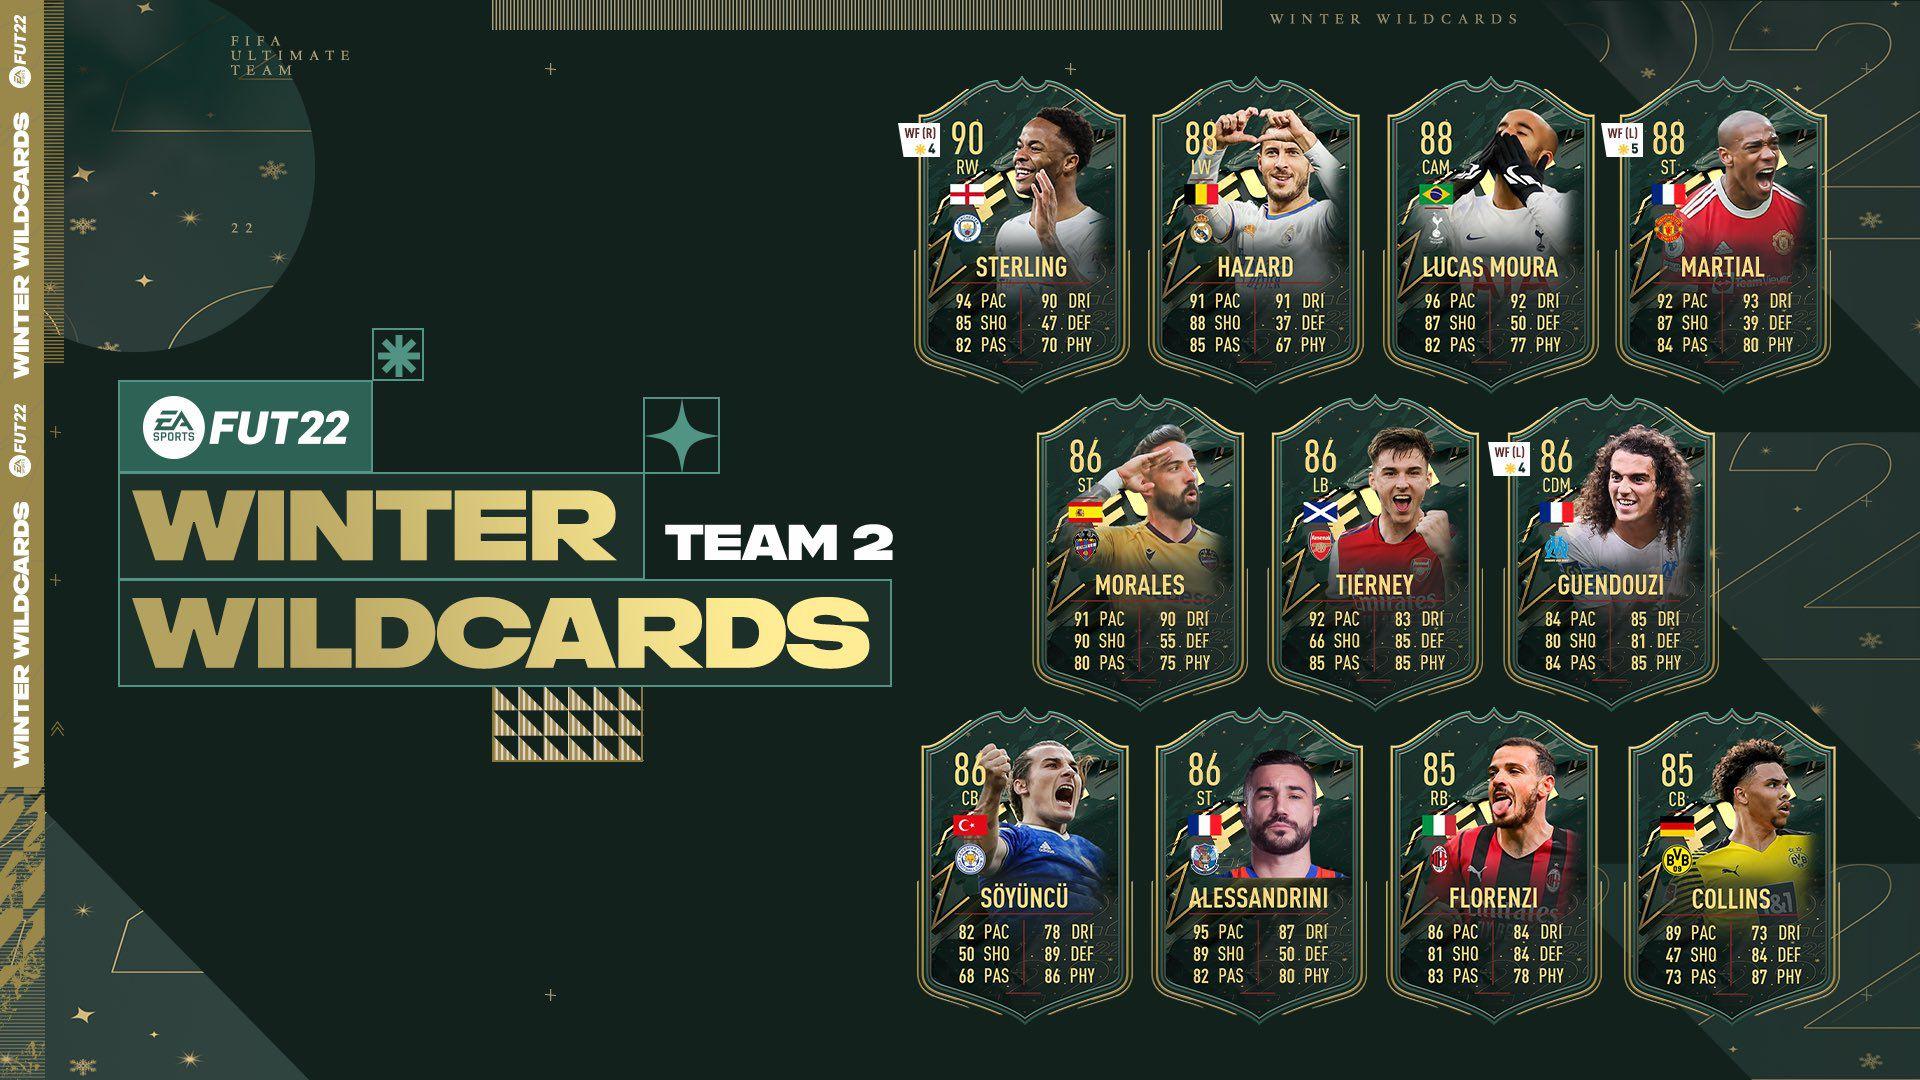 FIFA 22 Winter Wilcards Team 2 revealed.